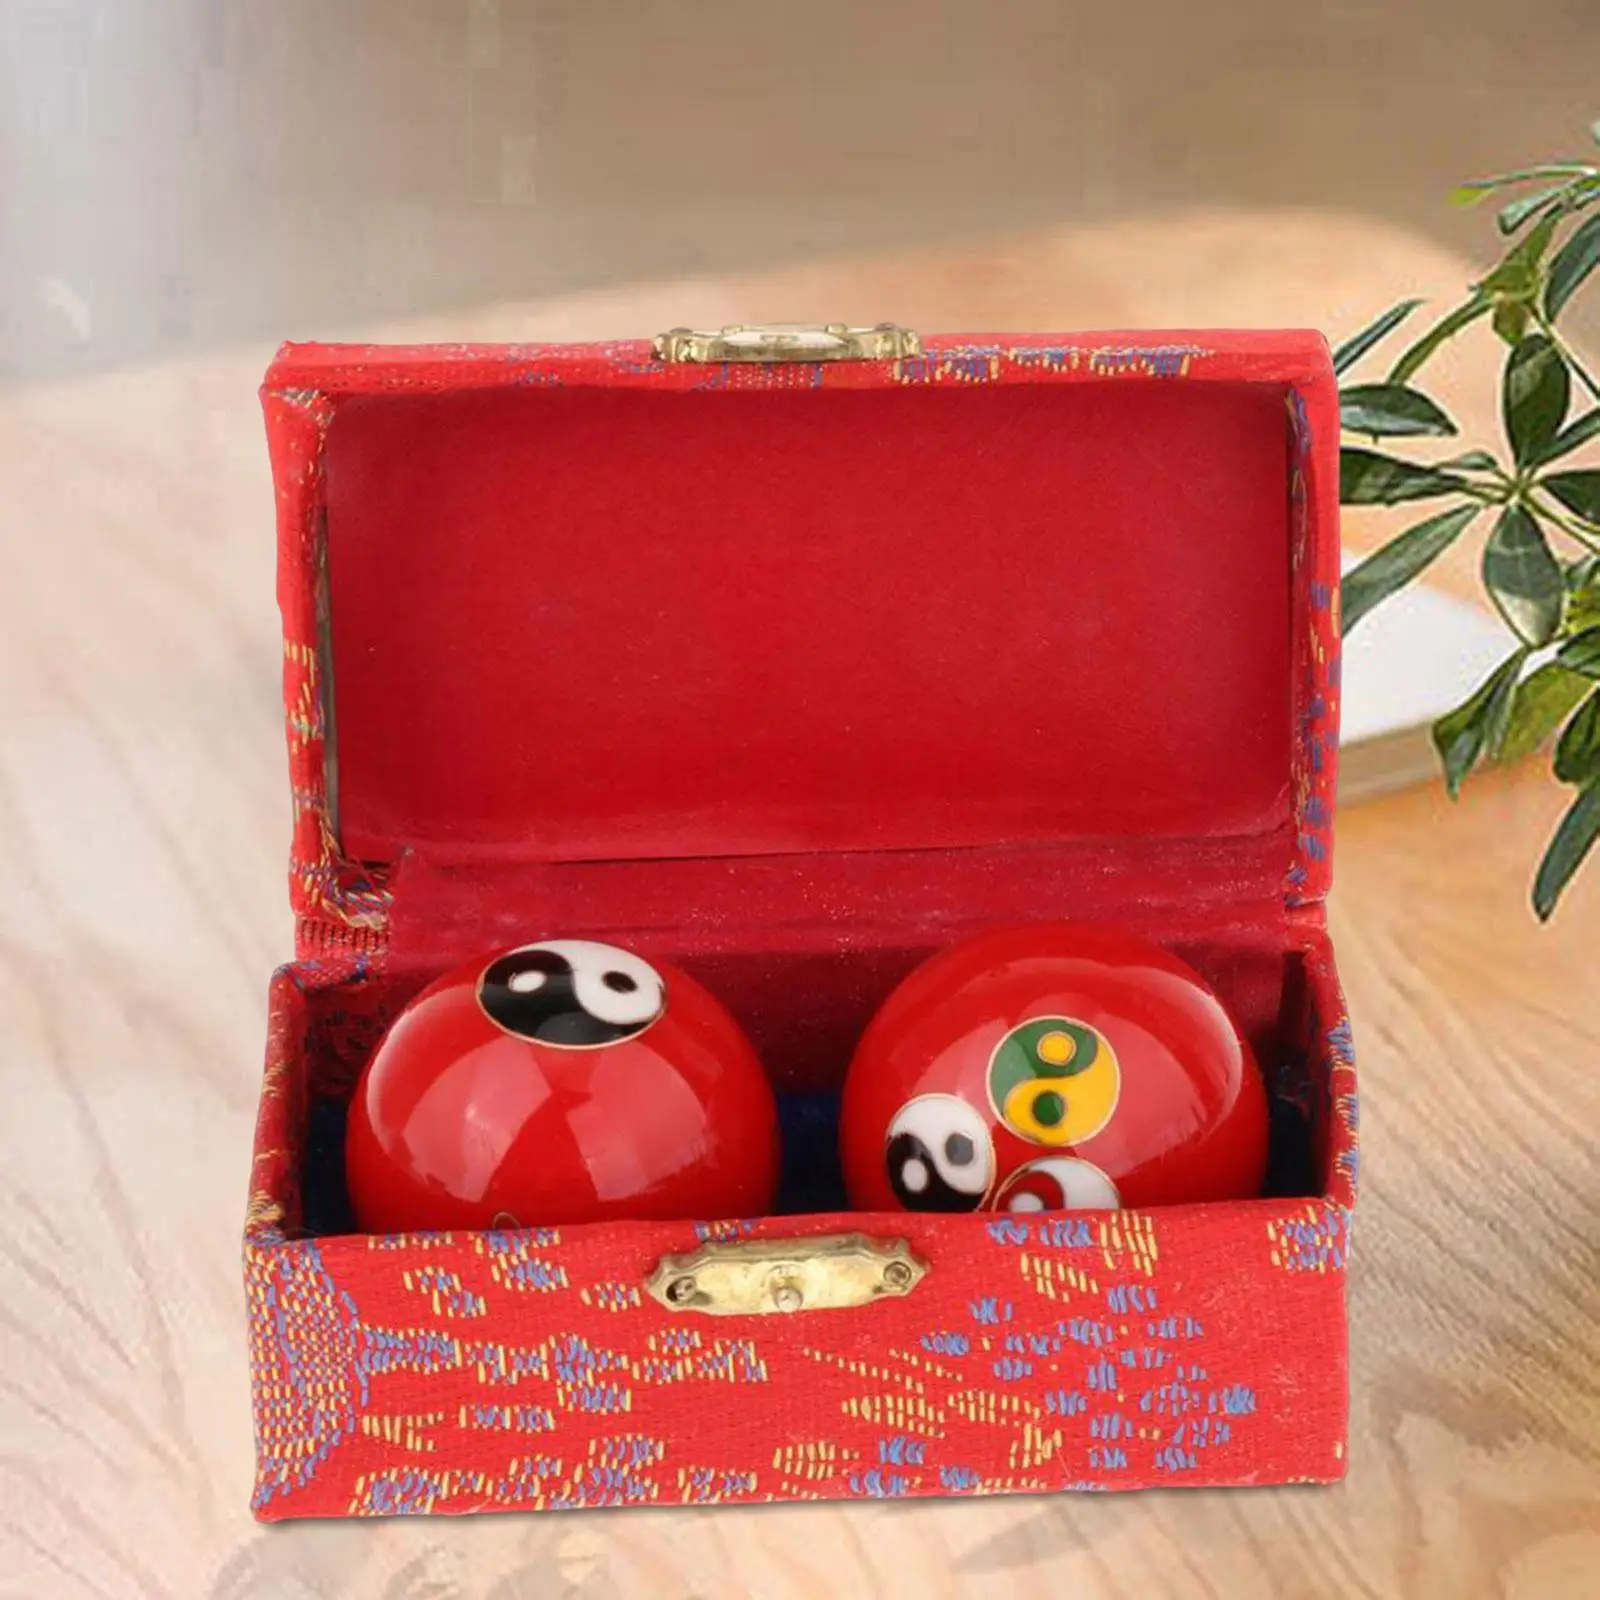 2 Pieces Chinese Massage Balls Exercise Handballs with Storage Box Gift Smooth